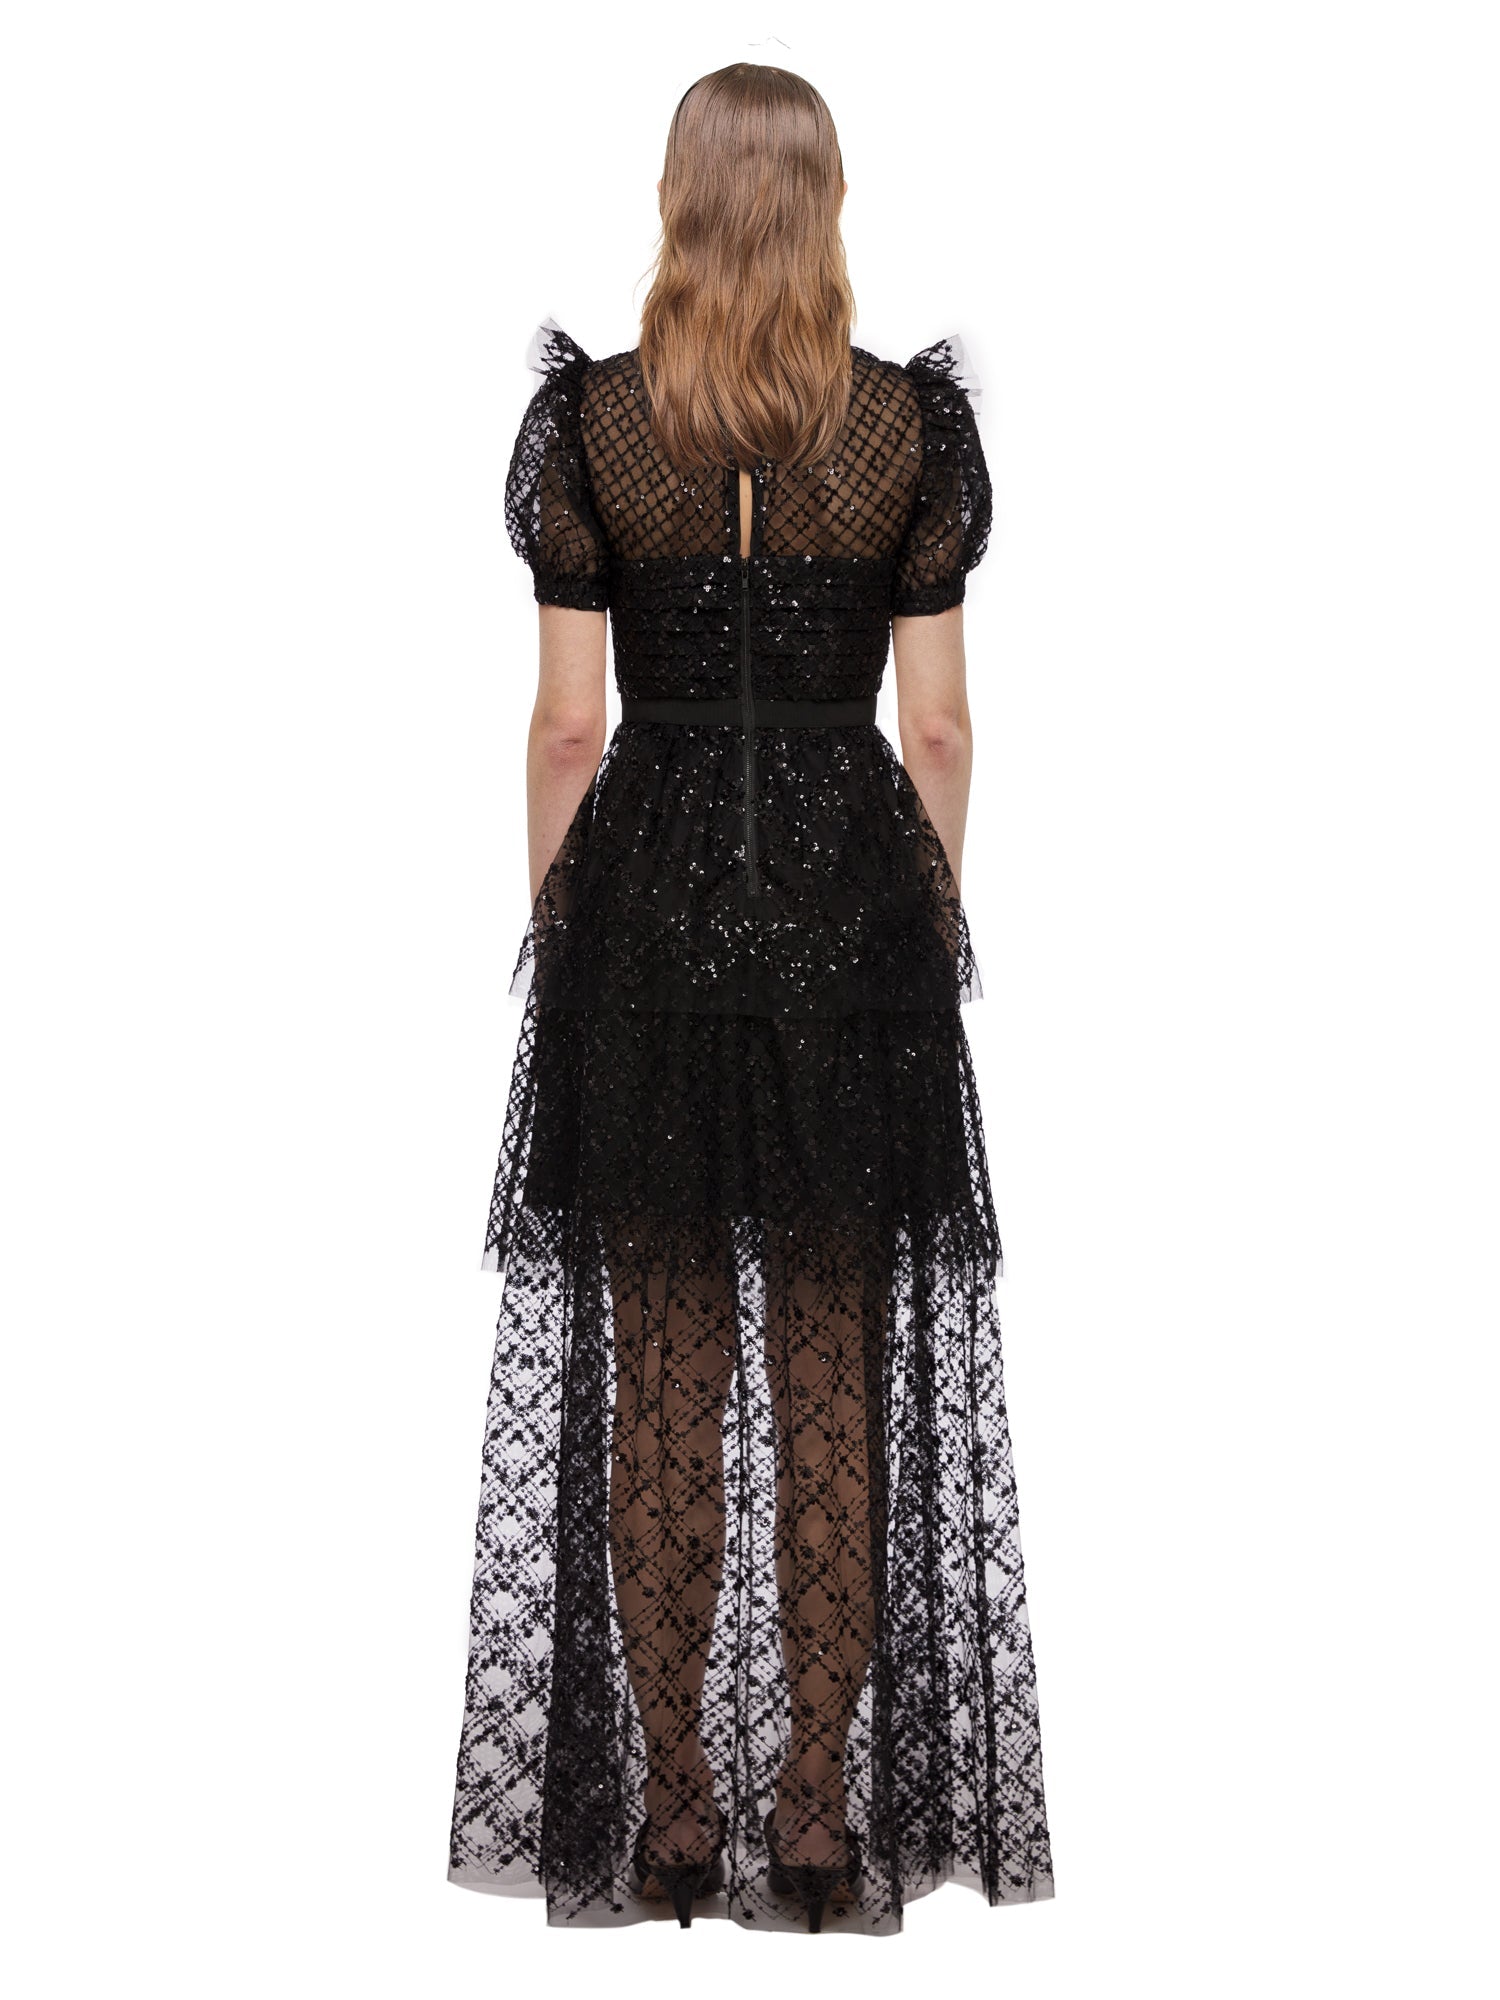 A woman wearing the Black Grid Sequin Tiered Maxi Dress